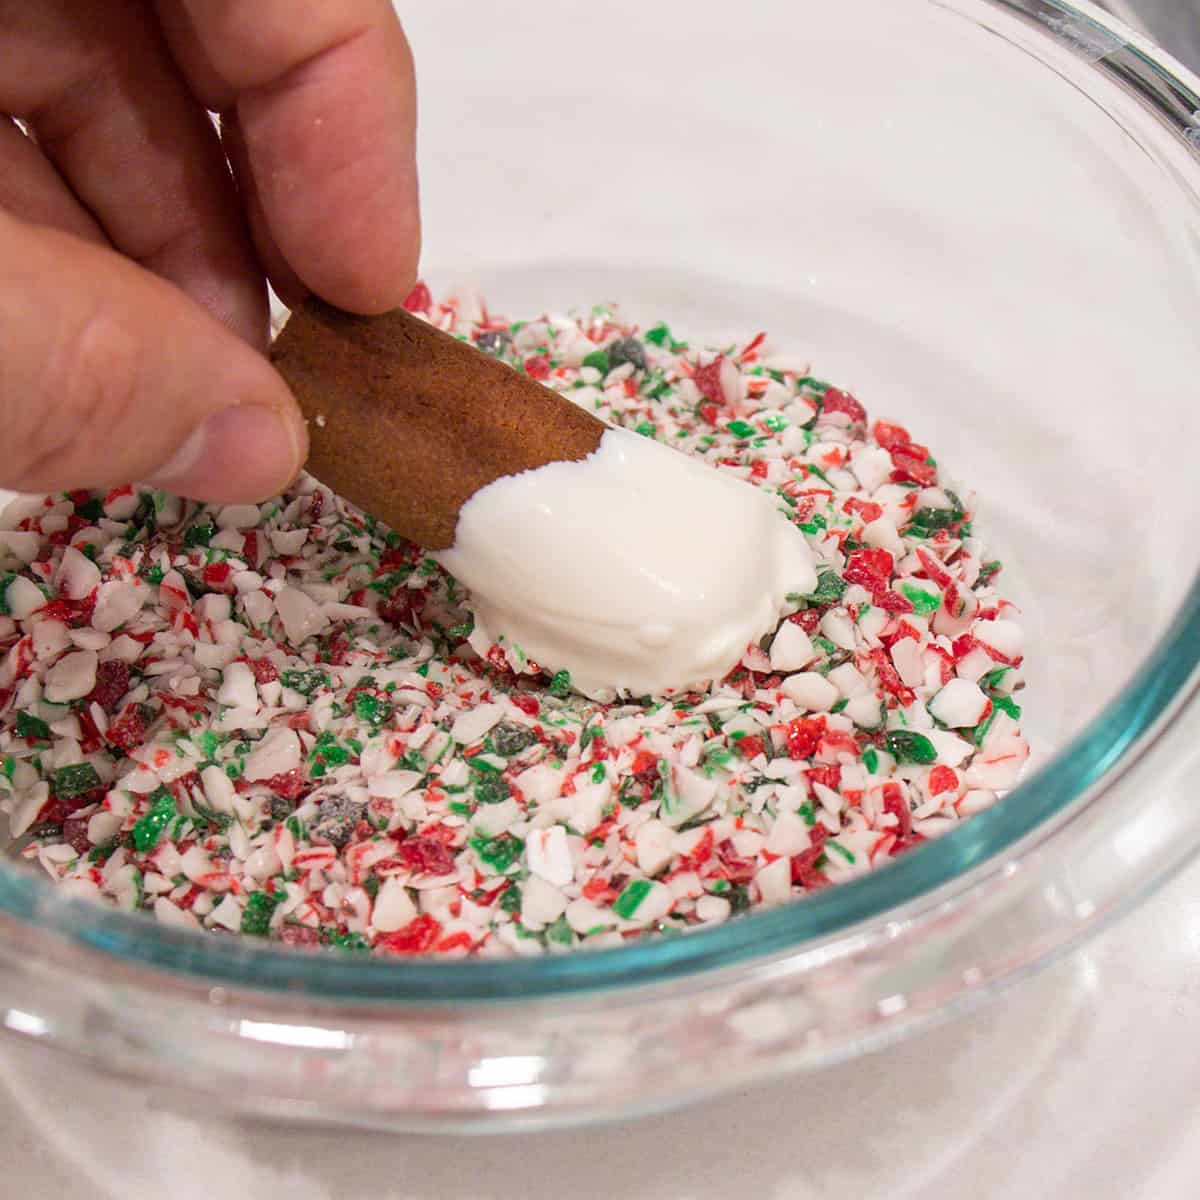 Dredging the cookie in a bowl of crushed candy canes.